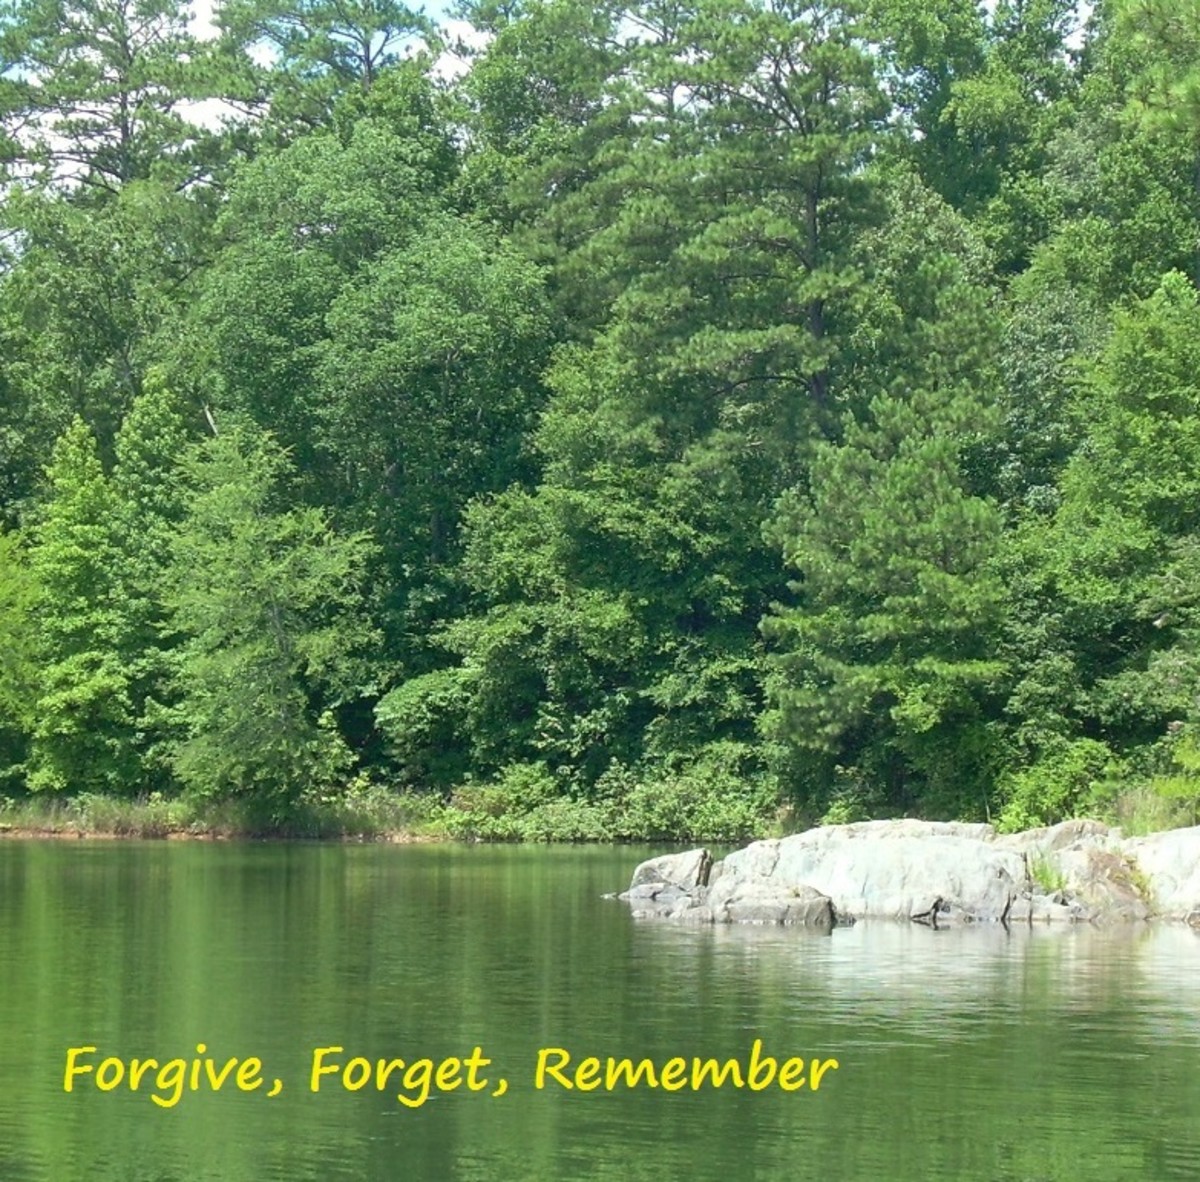 forgive-forget-and-remember